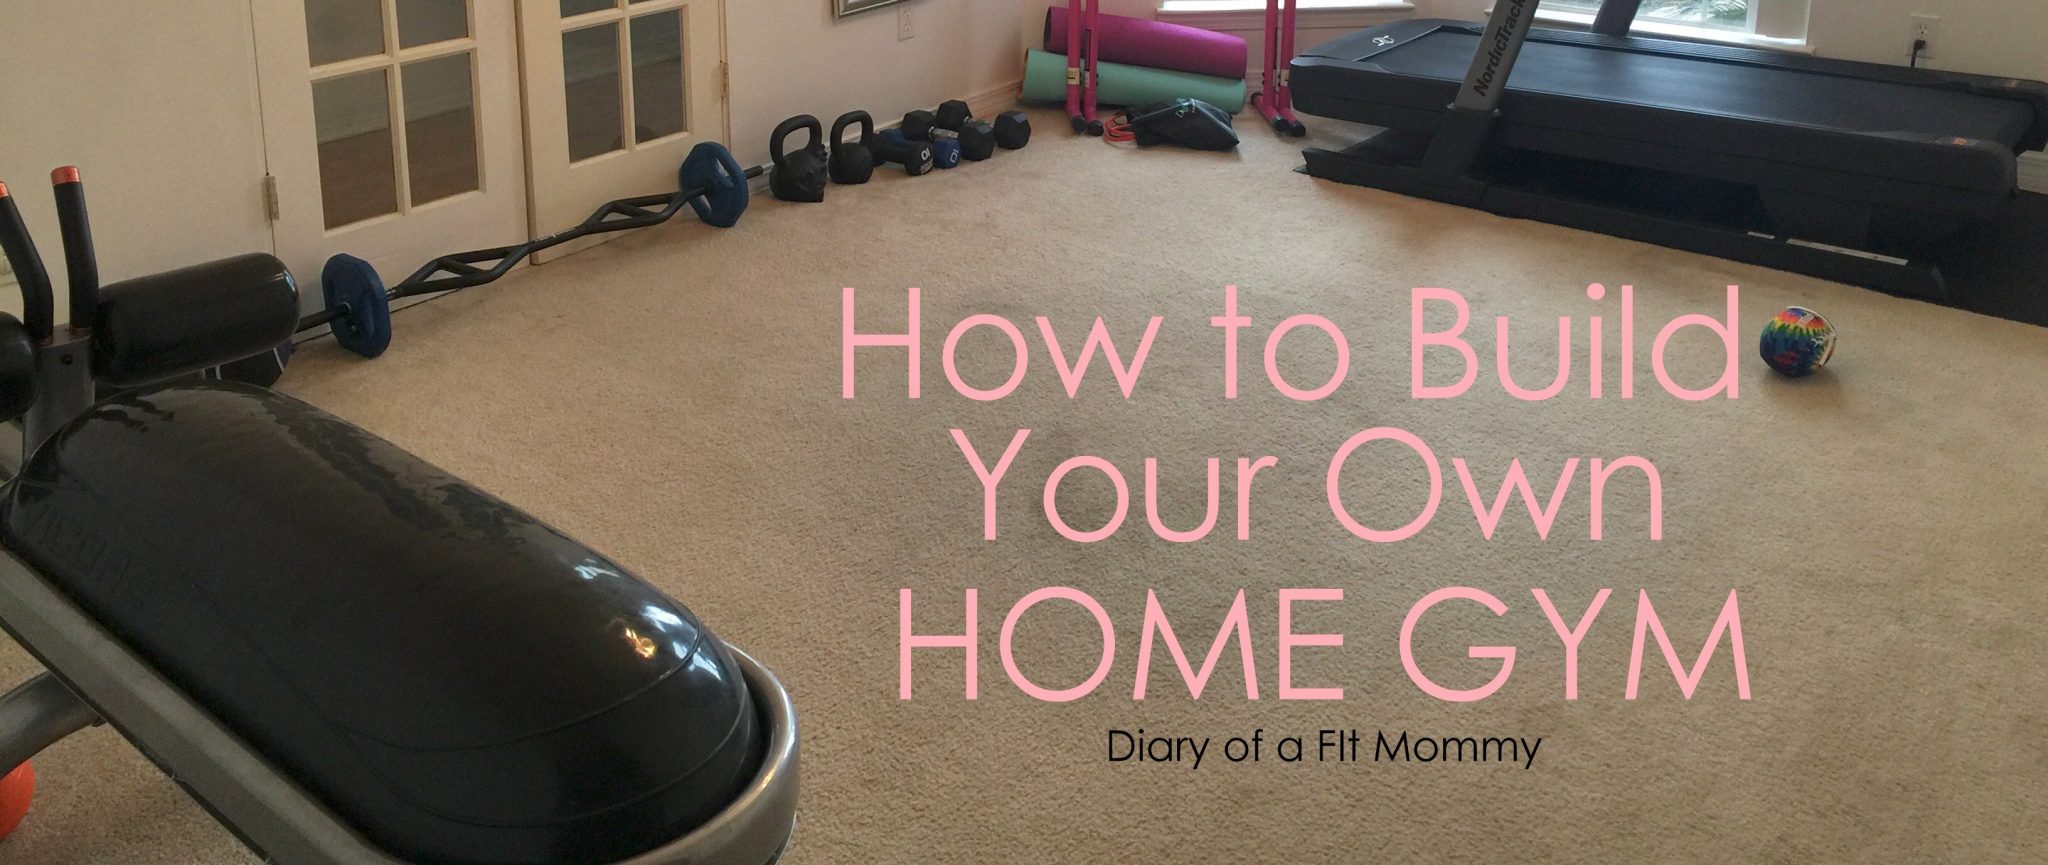 Diary of a Fit MommyHow to Build Your Own Home Gym - Diary of a Fit Mommy